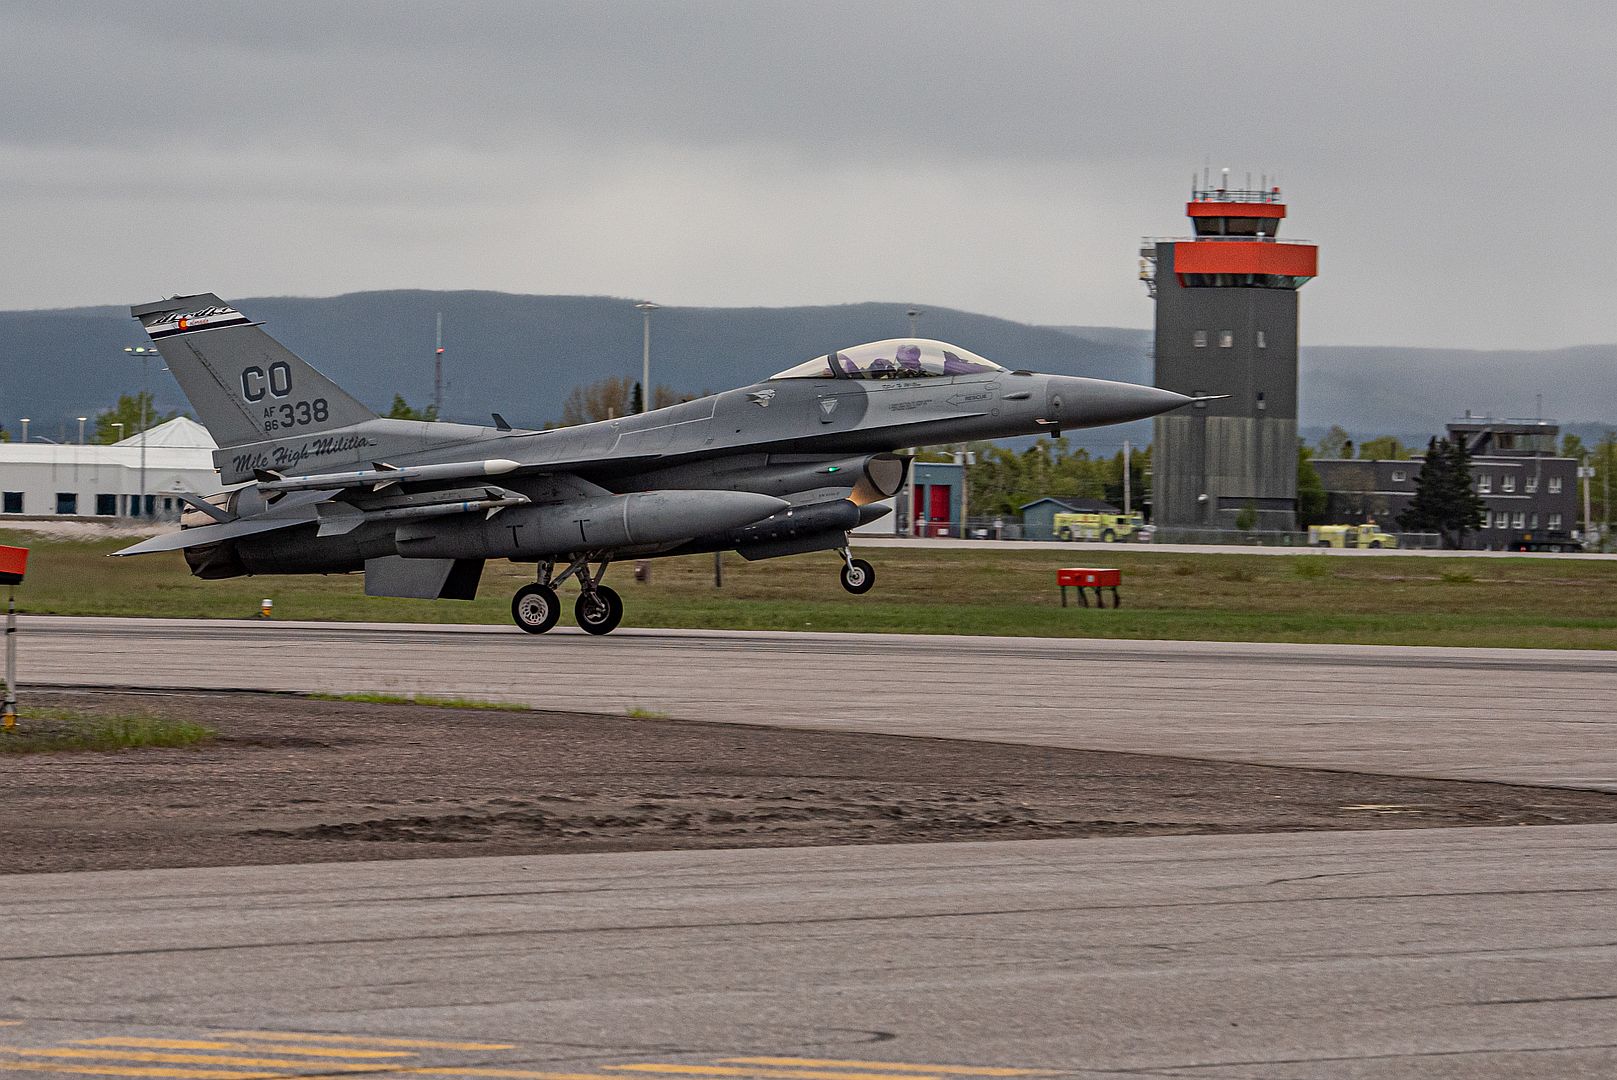 16 Fighting Falcon From The 140th Wing Colorado Air National Guard Arrives At 5 Wing Goose Bay Newfoundland And Labrador June 12 2021